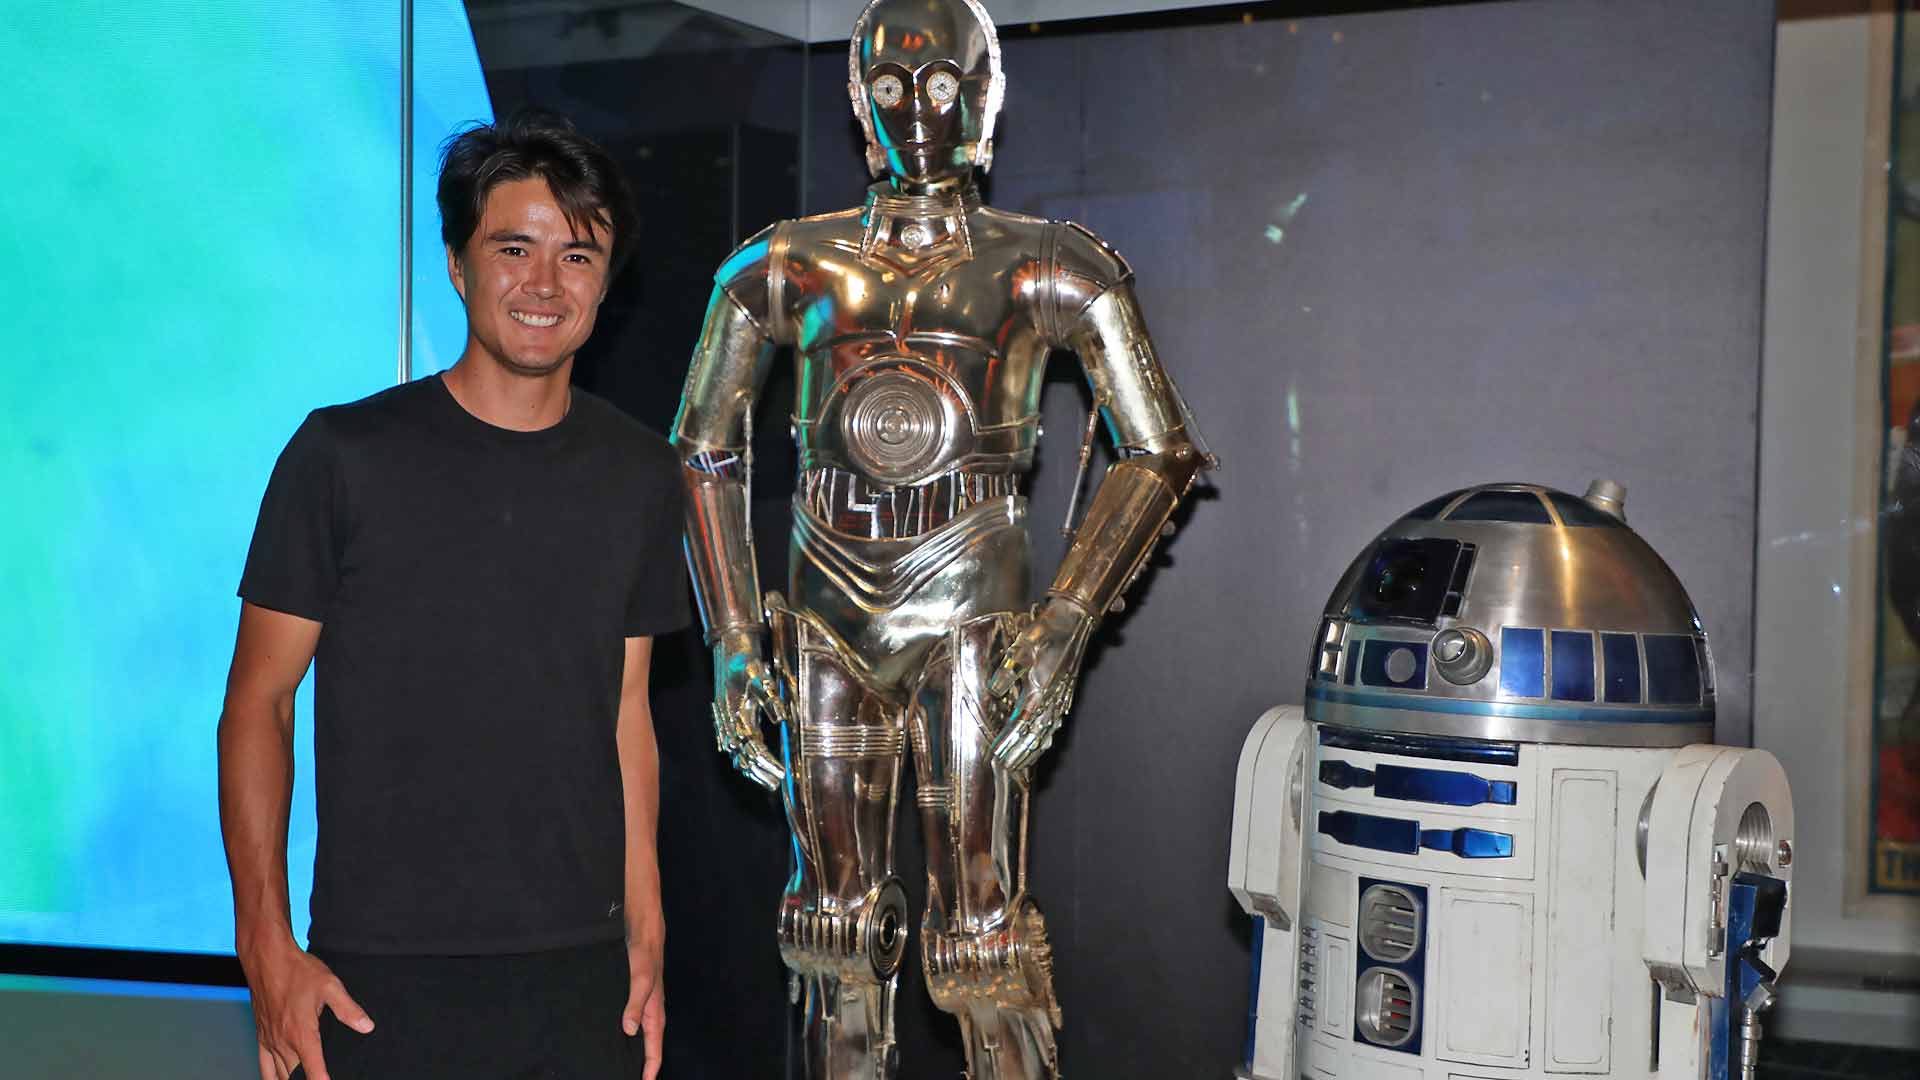 <a href='https://www.atptour.com/en/players/taro-daniel/da81/overview'>Taro Daniel</a> poses with C-3PO and R2-D2 from Star Wars at the National Museum of American History.